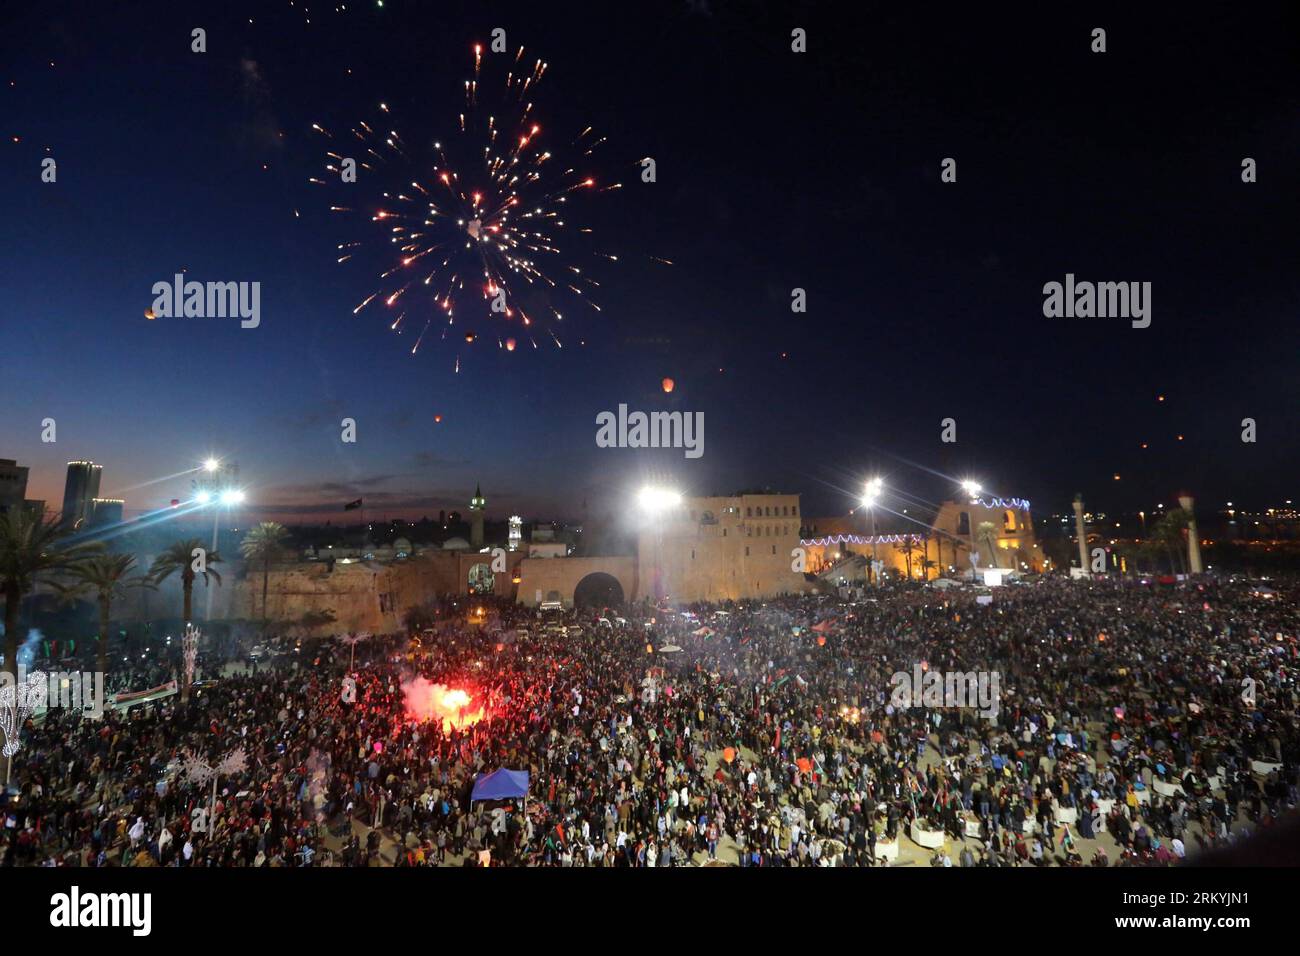 Bildnummer: 59232286  Datum: 17.02.2013  Copyright: imago/Xinhua (130217) -- TRIPOLI, Feb. 17, 2013 (Xinhua) -- gather to enjoy the fireworks during a celebration for the second anniversary of the Libyan uprising at the Martyrs Square in Tripoli on Feb. 17, 2013. (Xinhua/Hamza Turkia) LIBYA-TRIPOLI-CELEBRATION PUBLICATIONxNOTxINxCHN Gesellschaft Jubel Feier premiumd x0x xac 2013 quer      59232286 Date 17 02 2013 Copyright Imago XINHUA  Tripoli Feb 17 2013 XINHUA gather to Enjoy The Fireworks during a Celebration for The Second Anniversary of The Libyan Uprising AT The Martyrs Square in Tripol Stock Photo